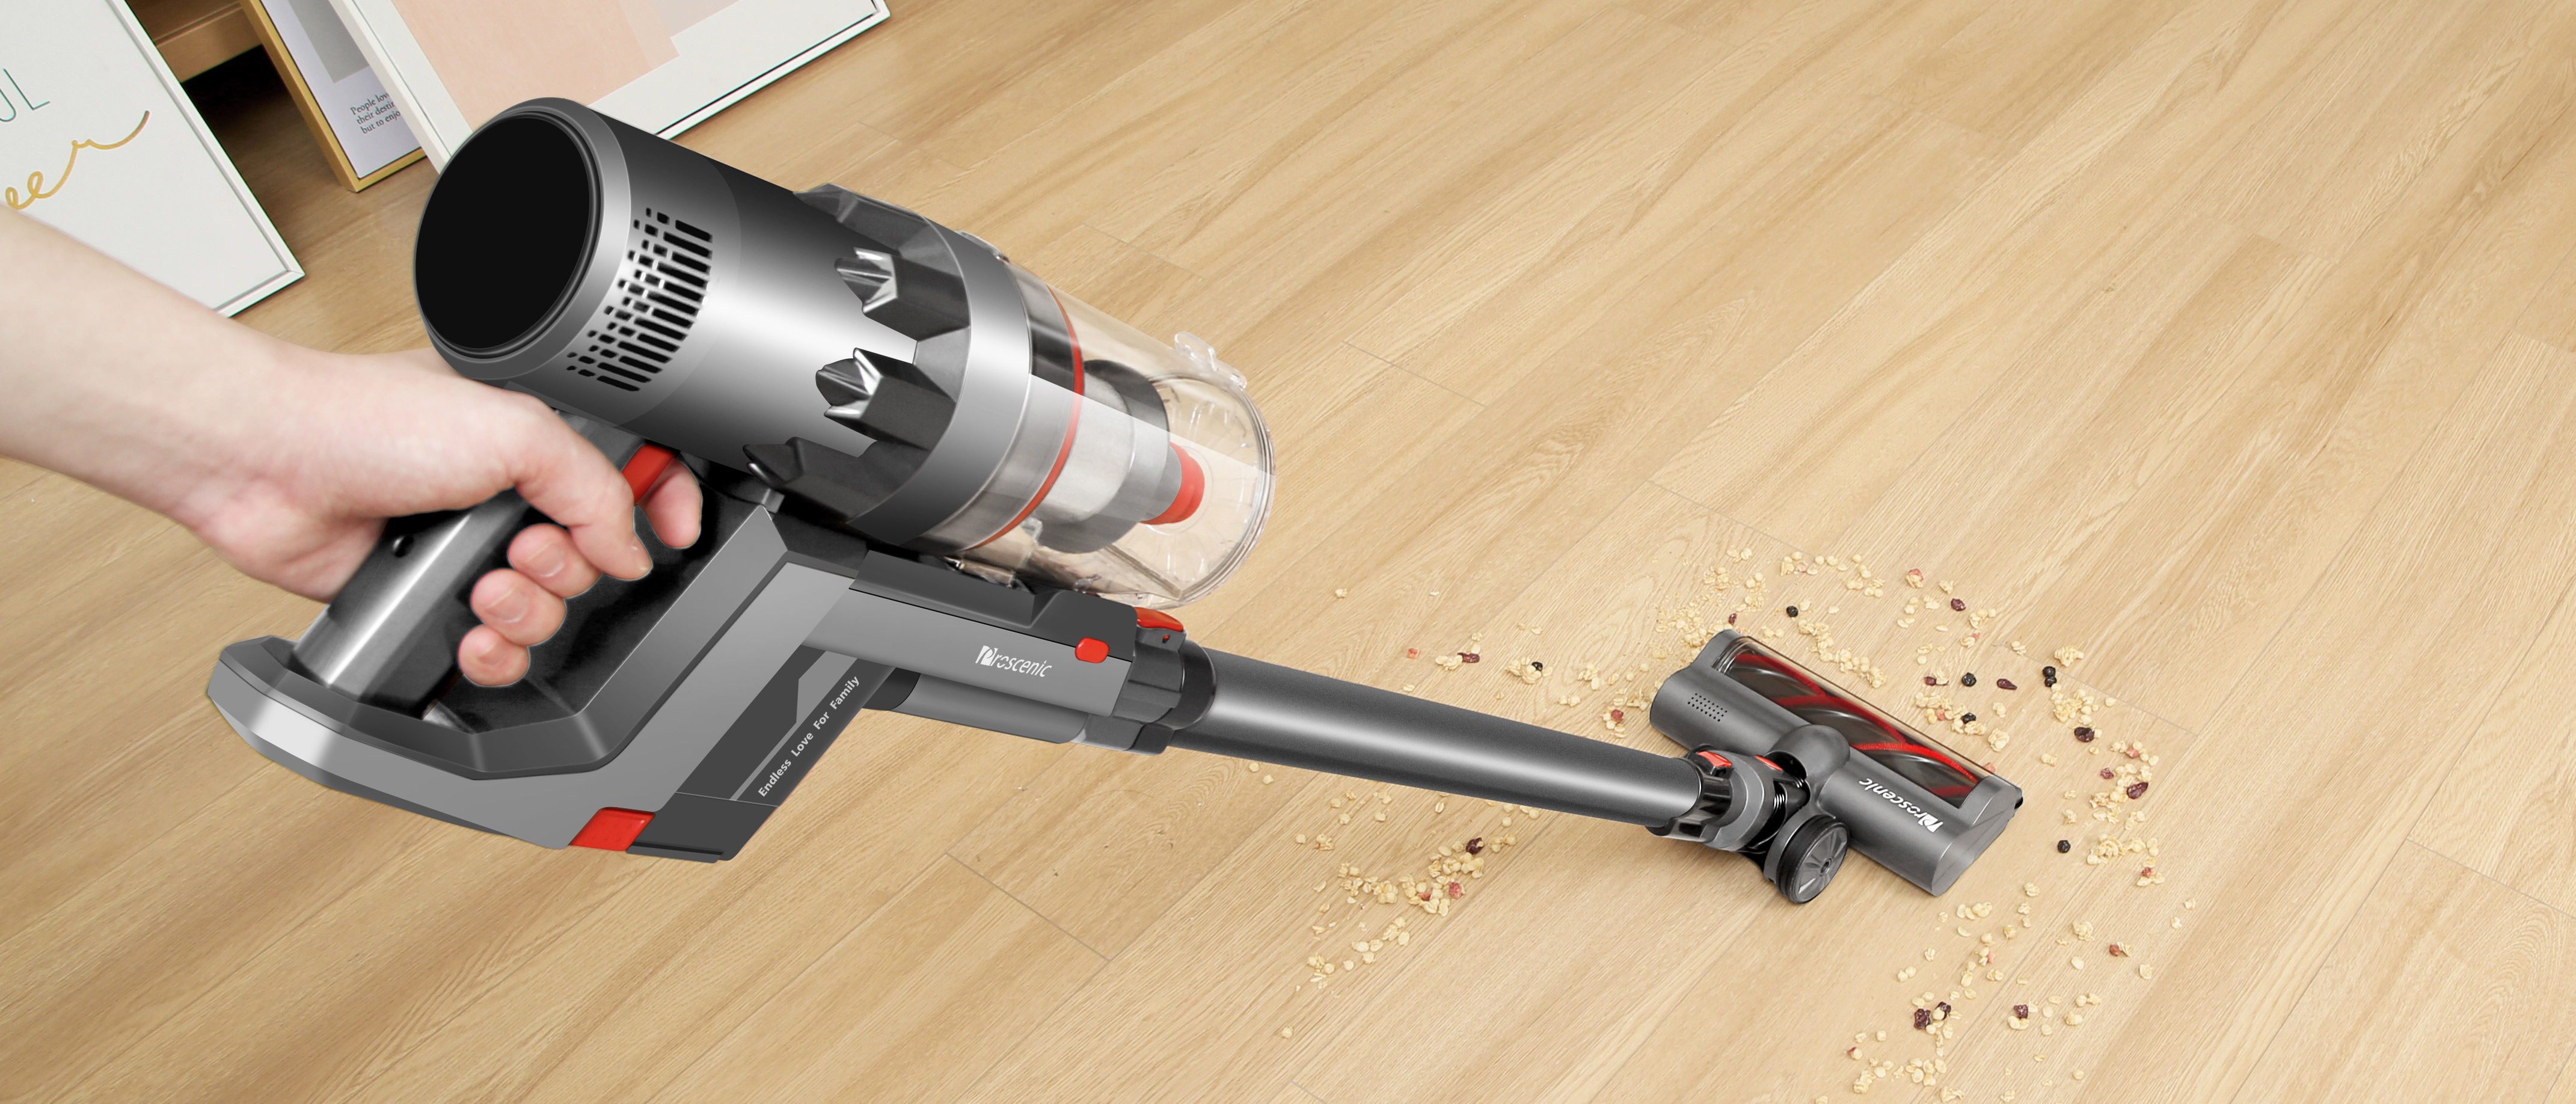 Proscenic P11 cordless vacuum review: Super suction specs don't result in  cleaner floors